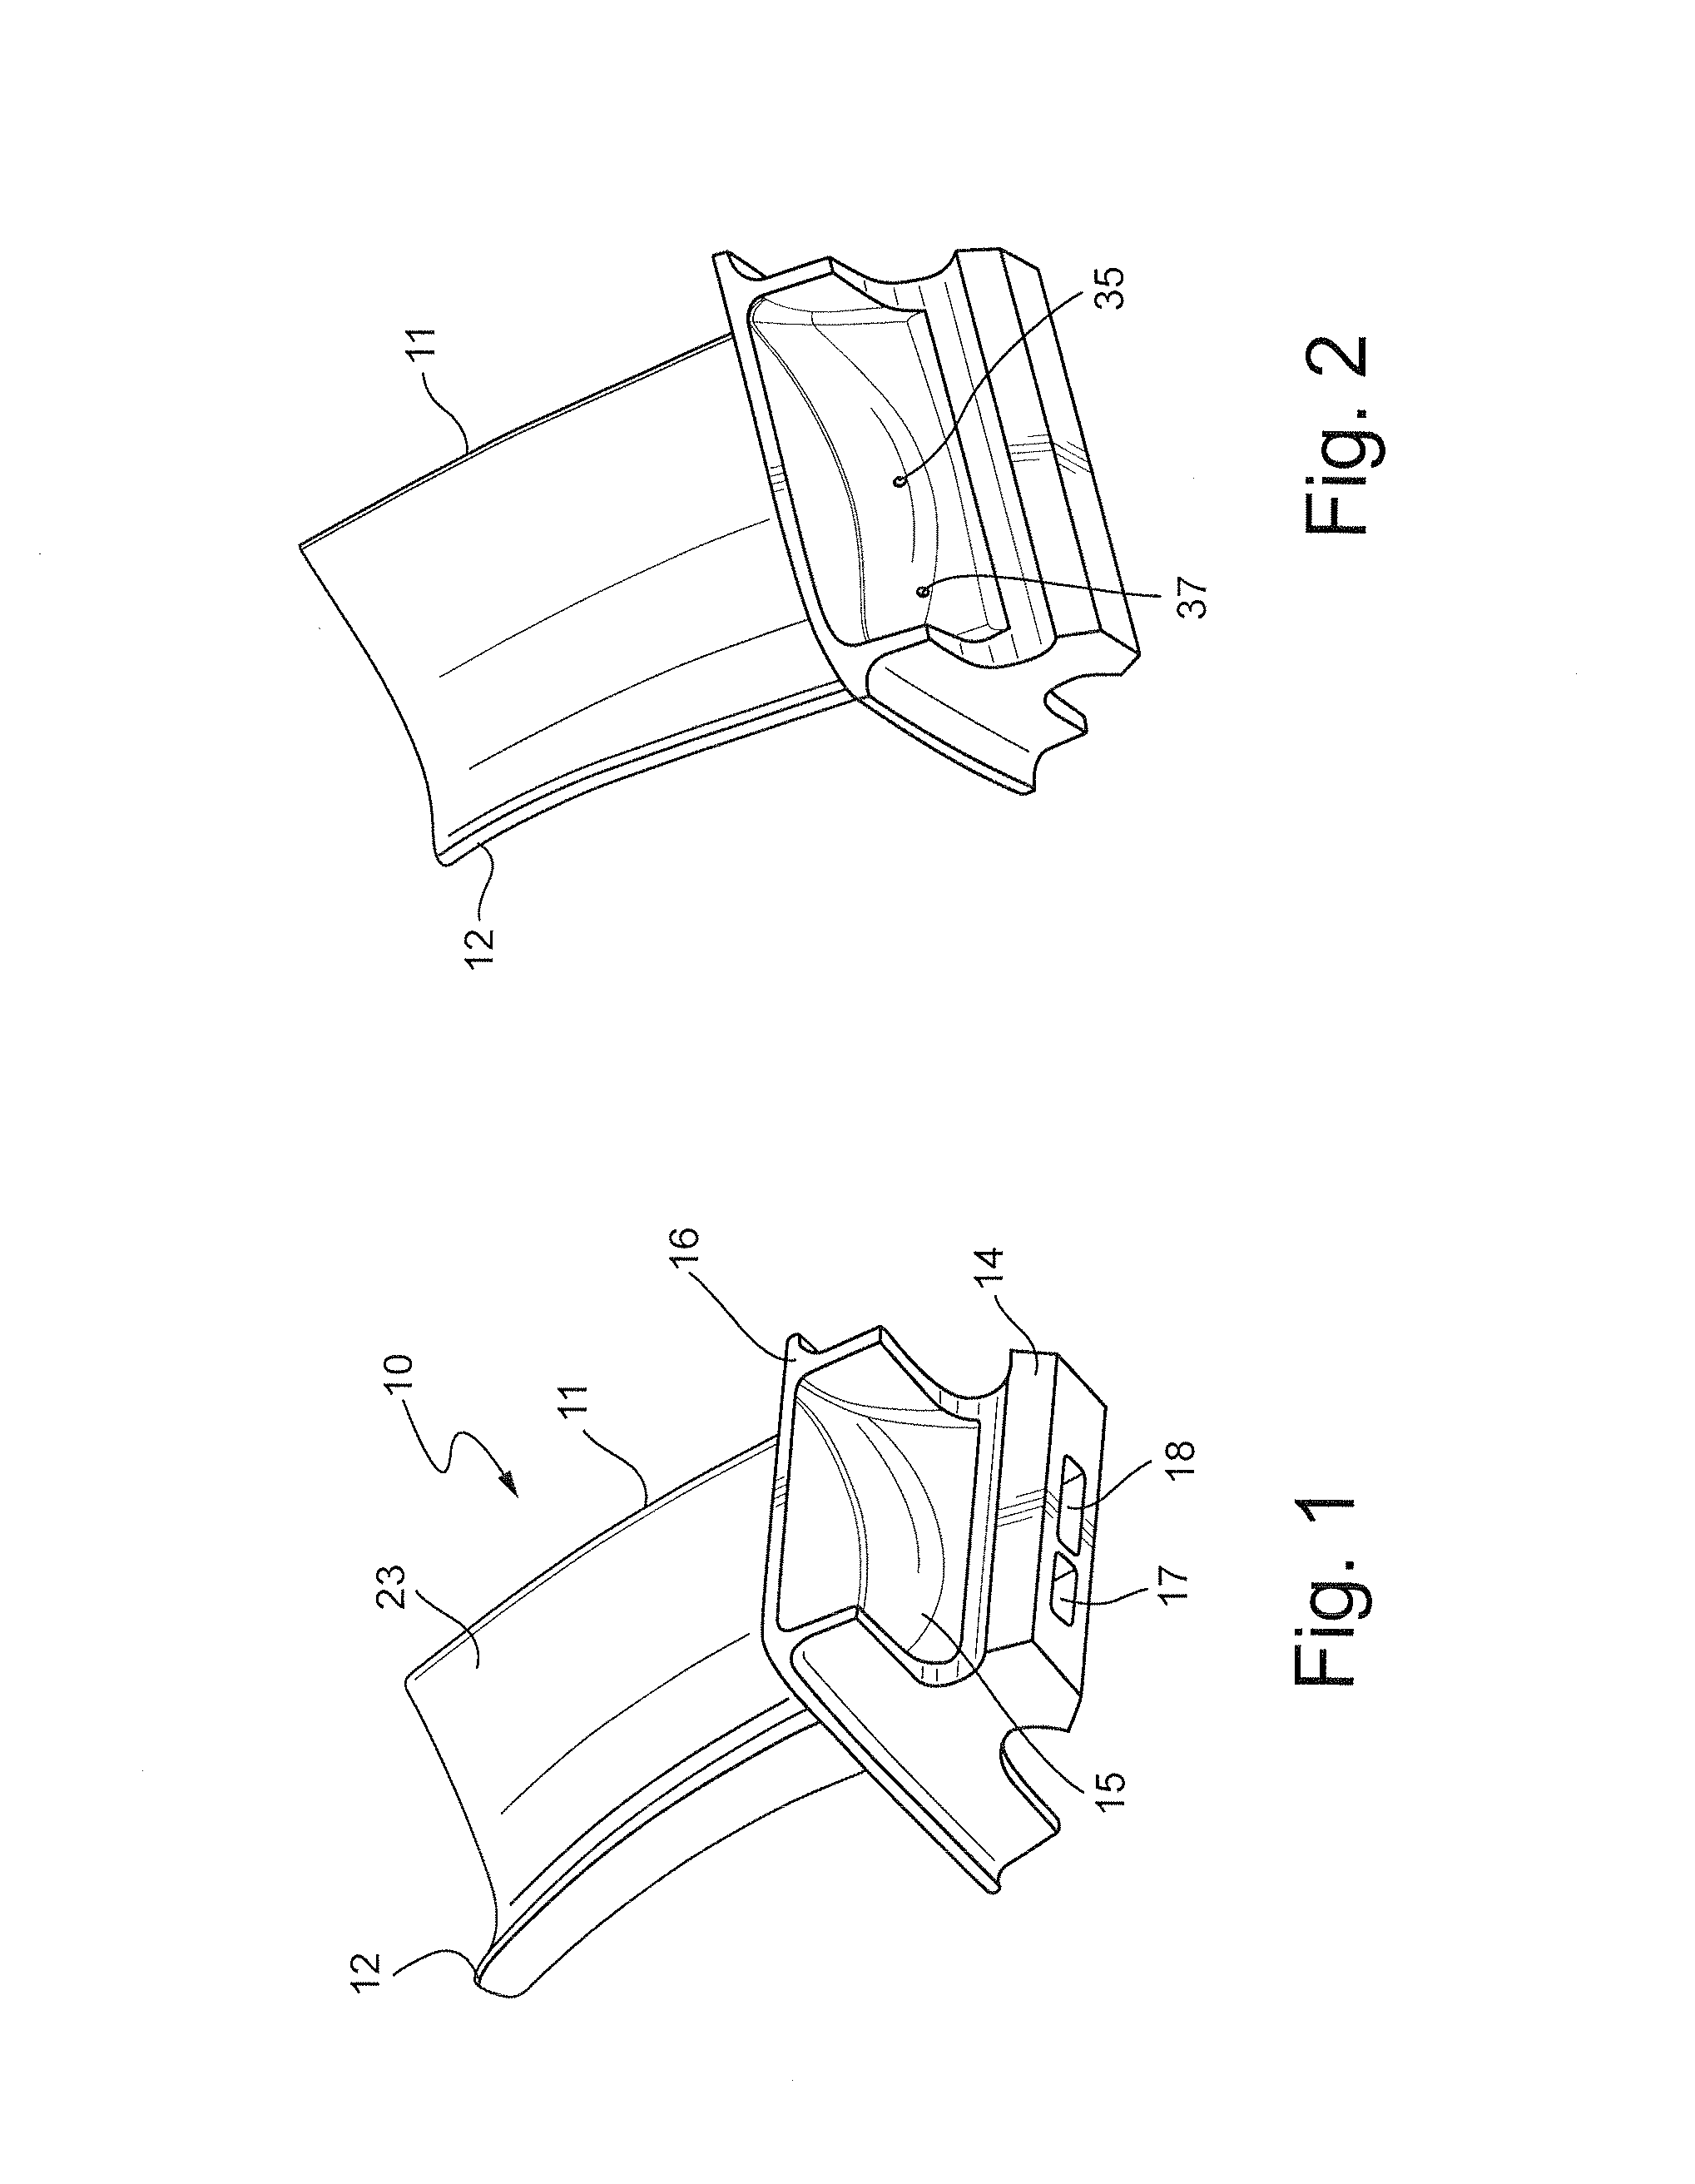 Cmc blade with pressurized internal cavity for erosion control